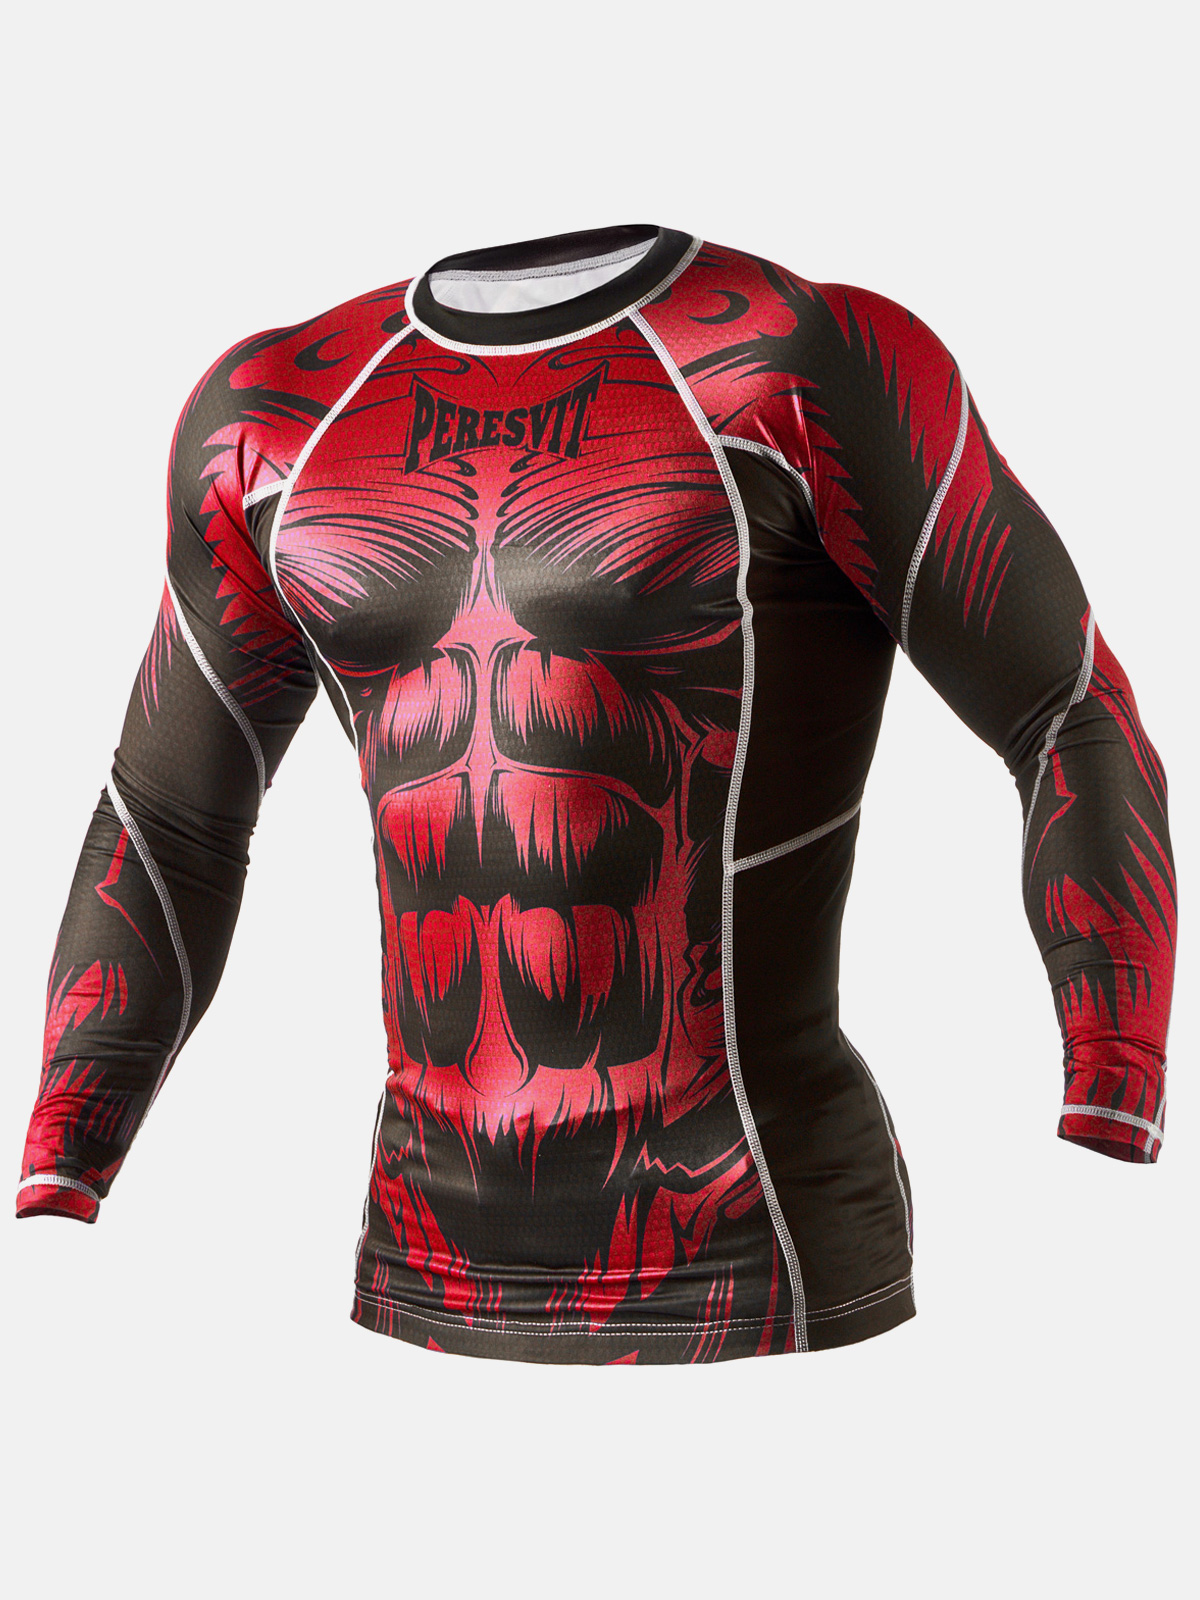 Peresvit Beast Silver Force Long Sleeve Red, Photo No. 4